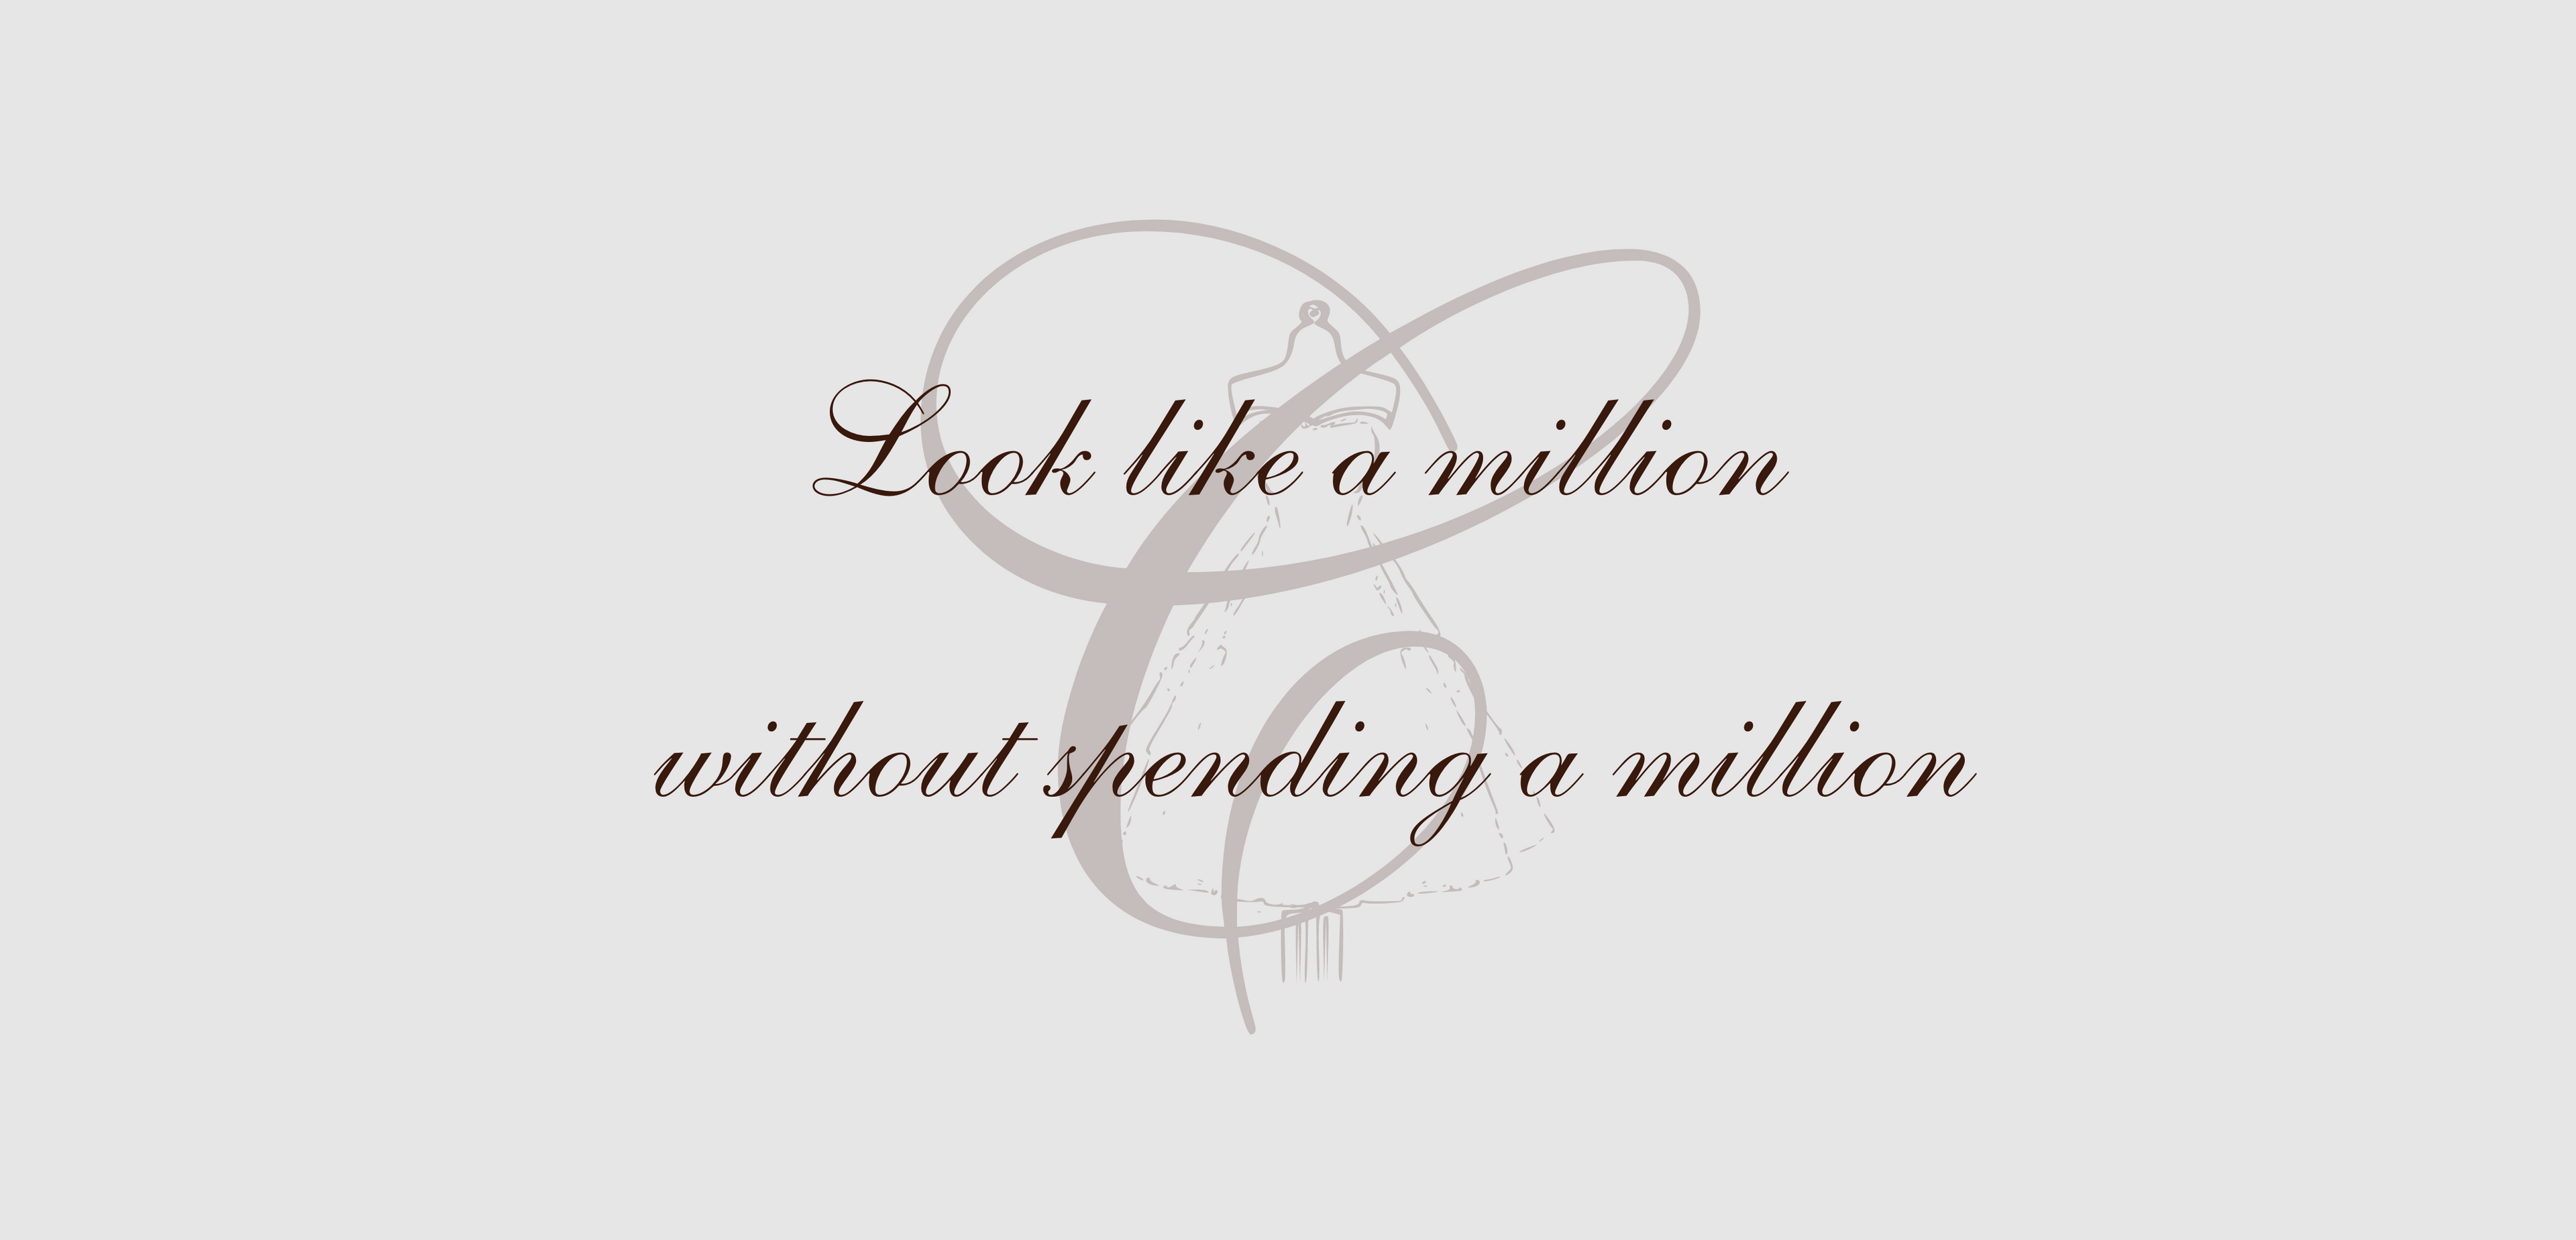 Our logo with our slogan, "Look like a million without spending a million."